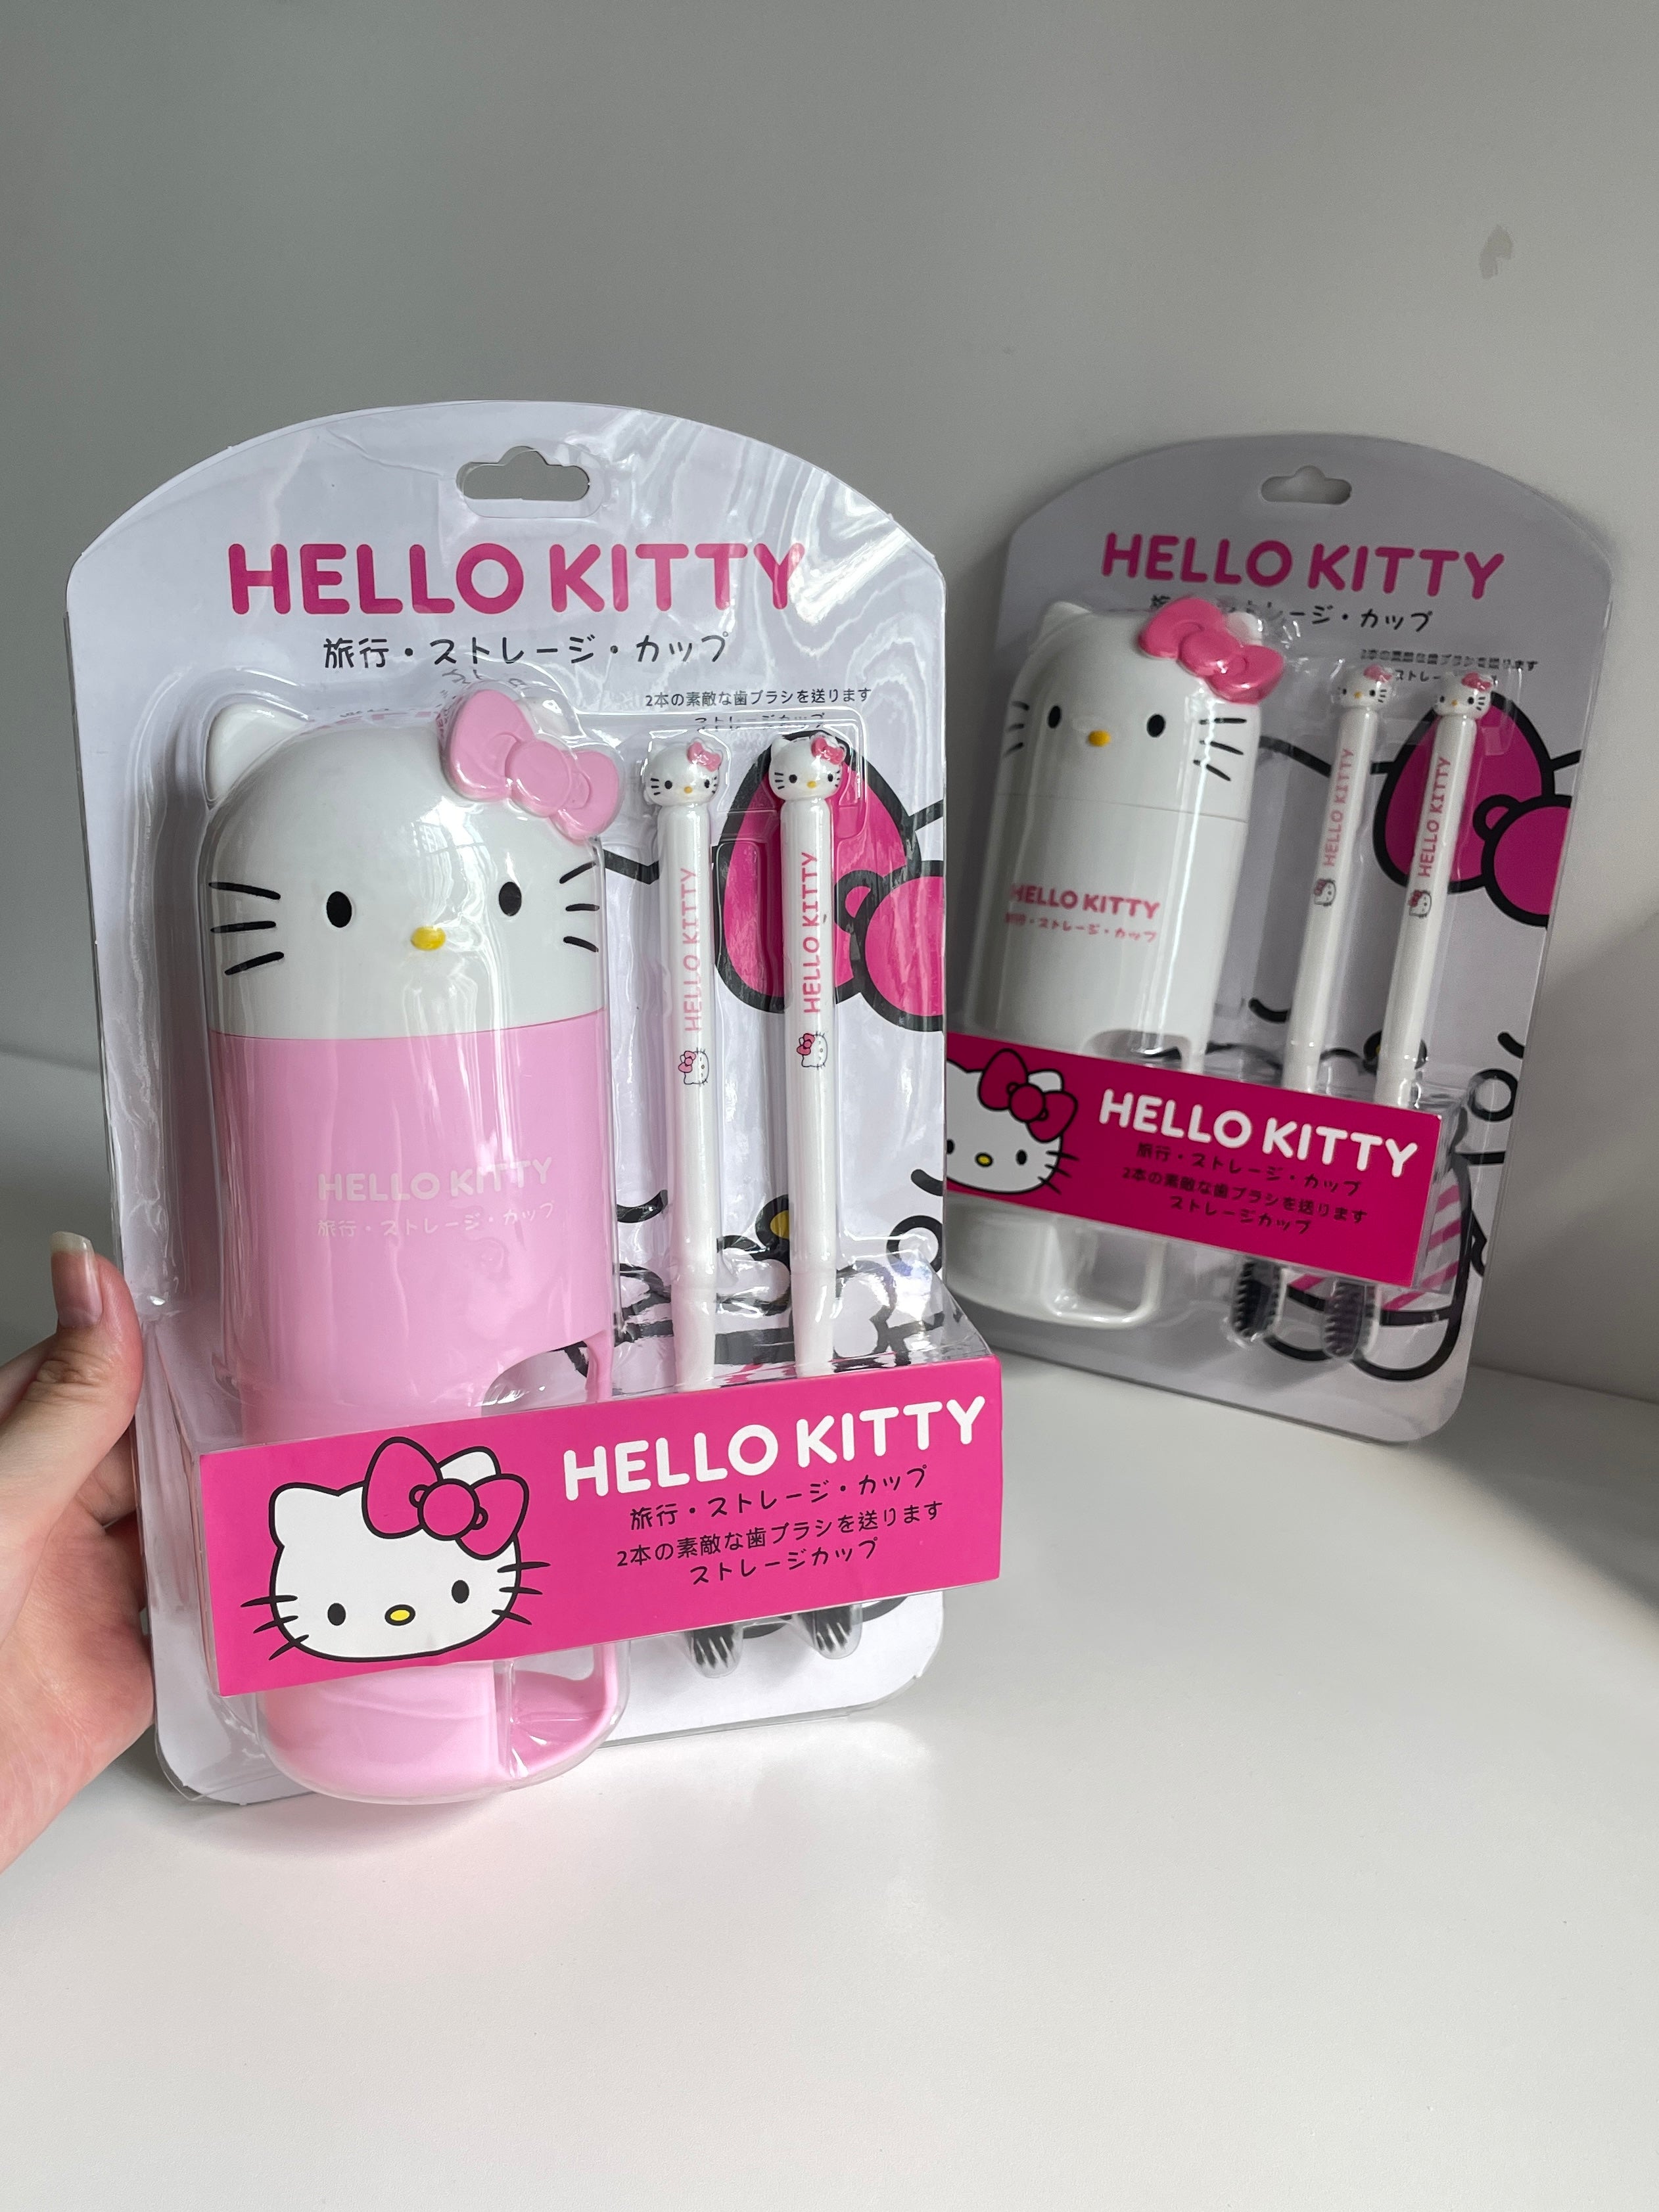 Hellokitty Travel Toothbrush Cup 2 Toothbrush Included Portable Business Trips Wash Cup Holder Travel Toothpaste Holder Organizer